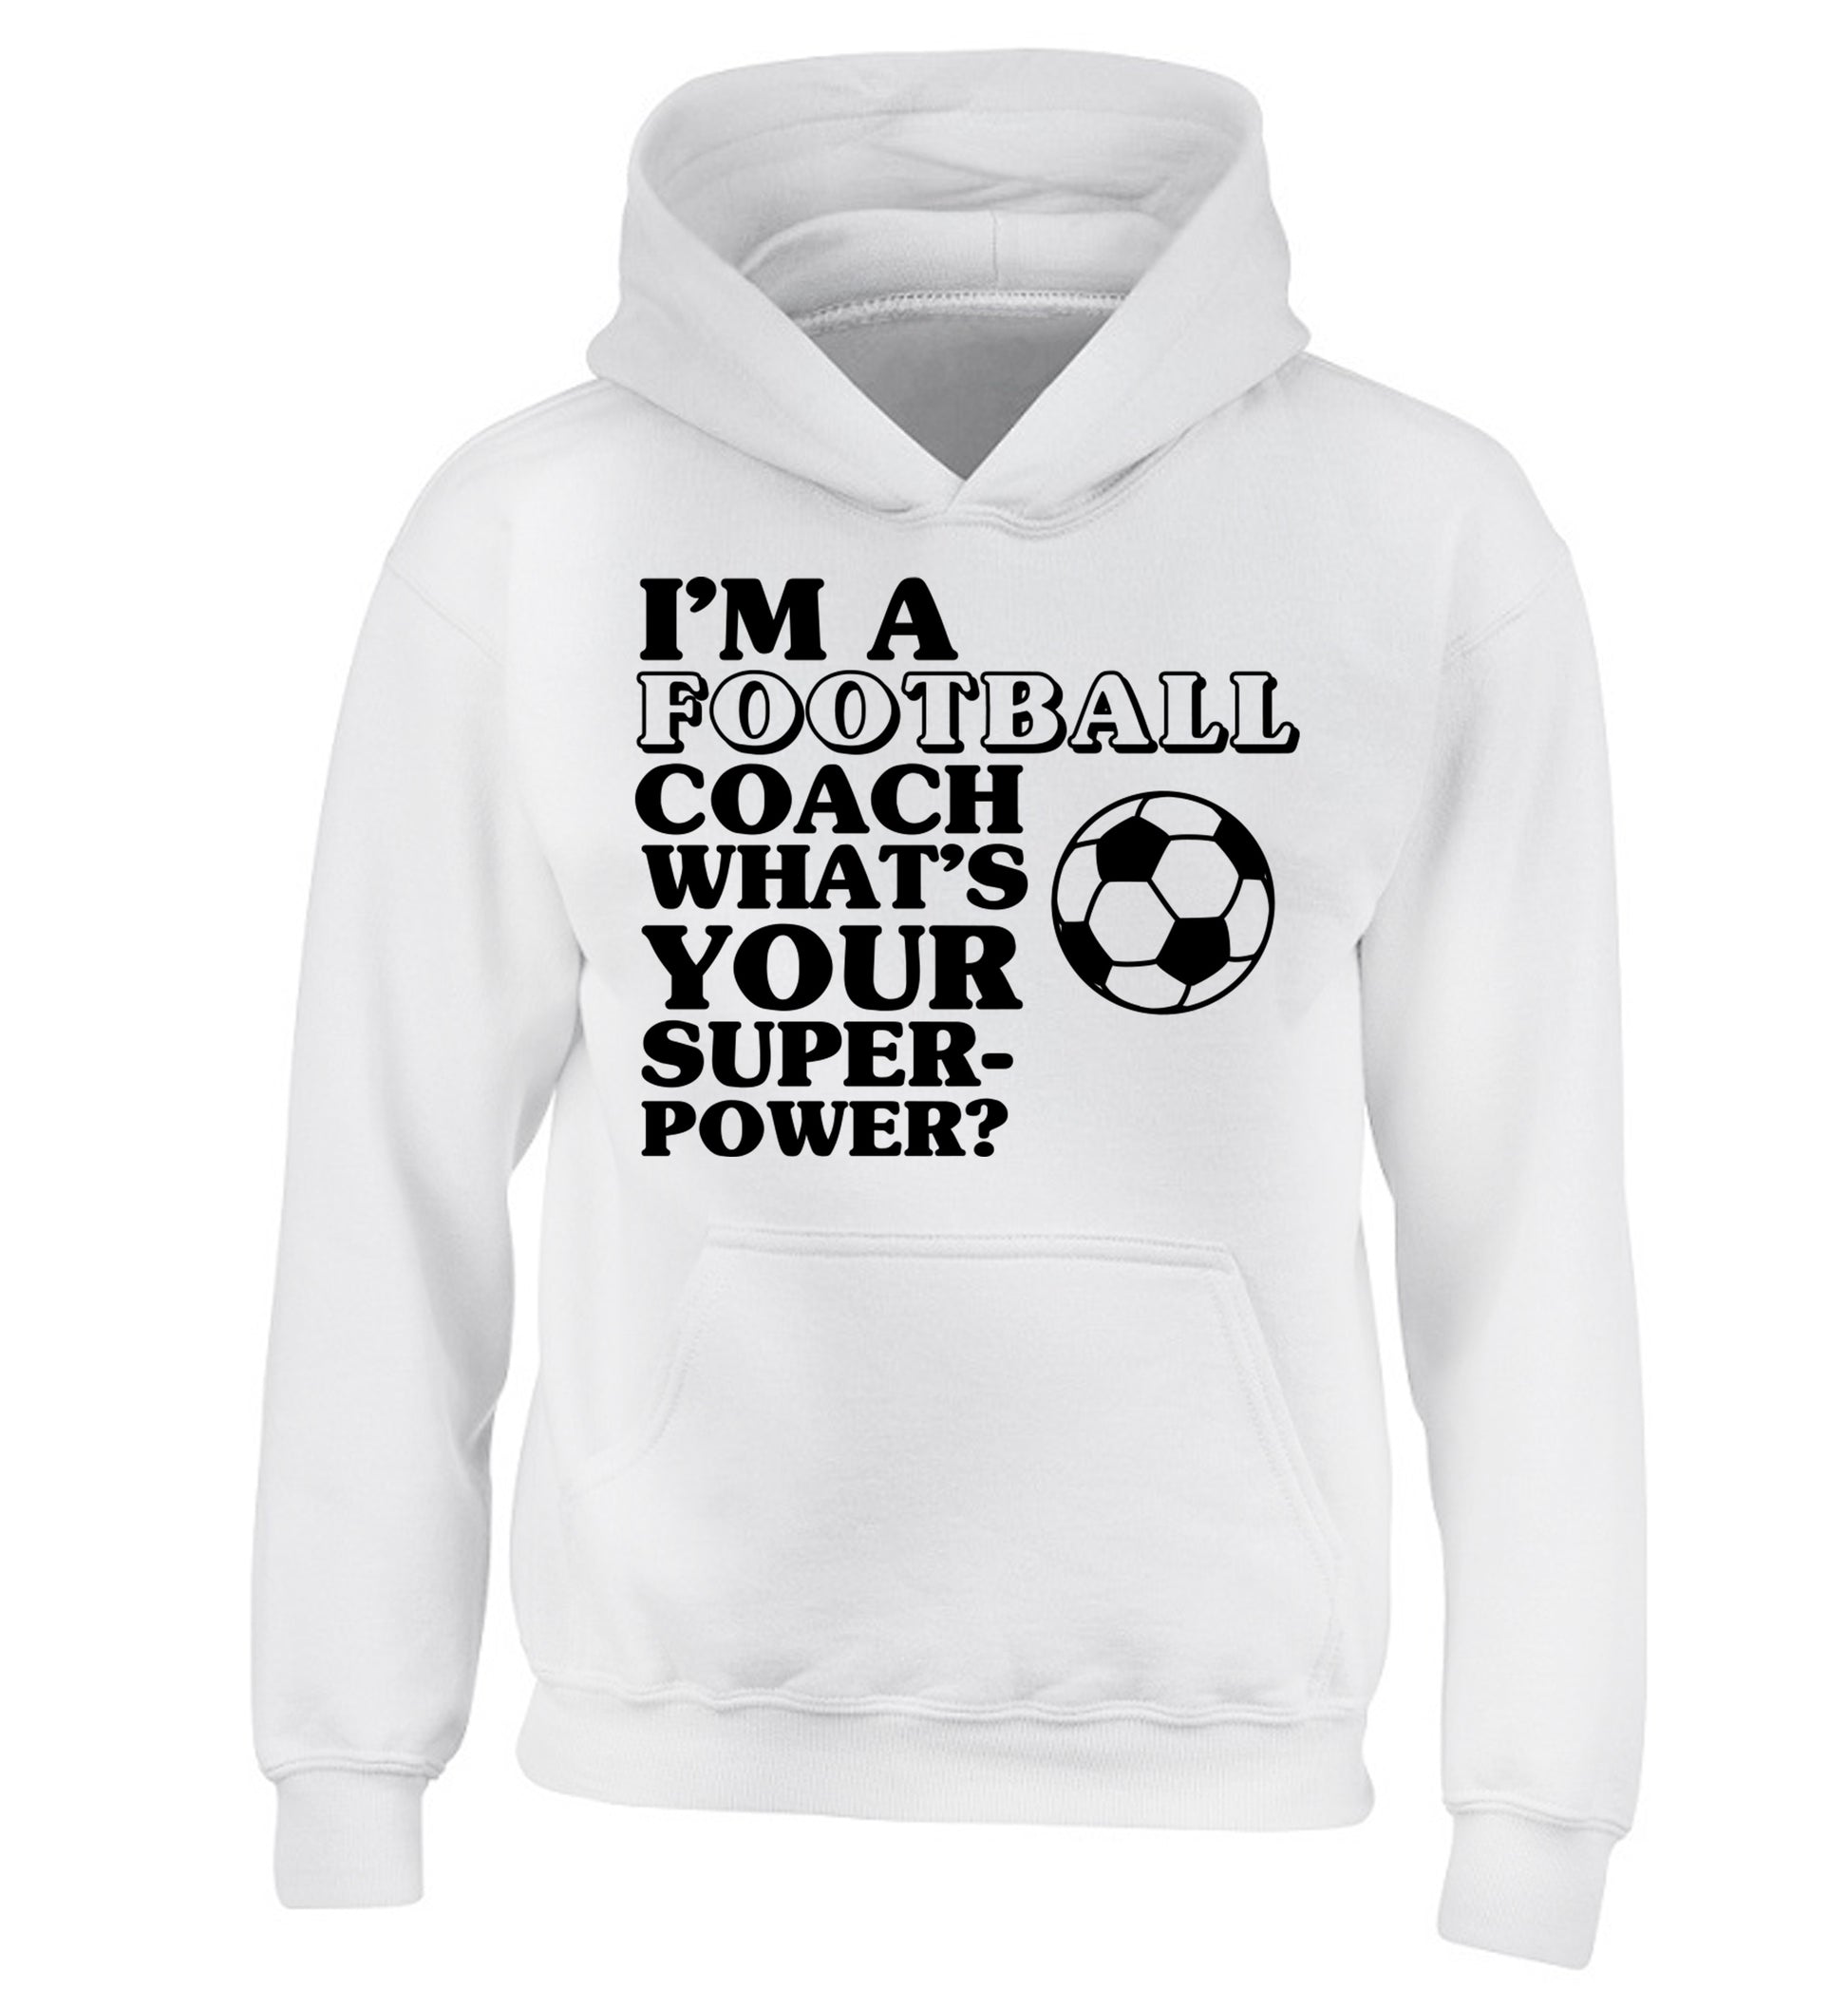 I'm a football coach what's your superpower? children's white hoodie 12-14 Years